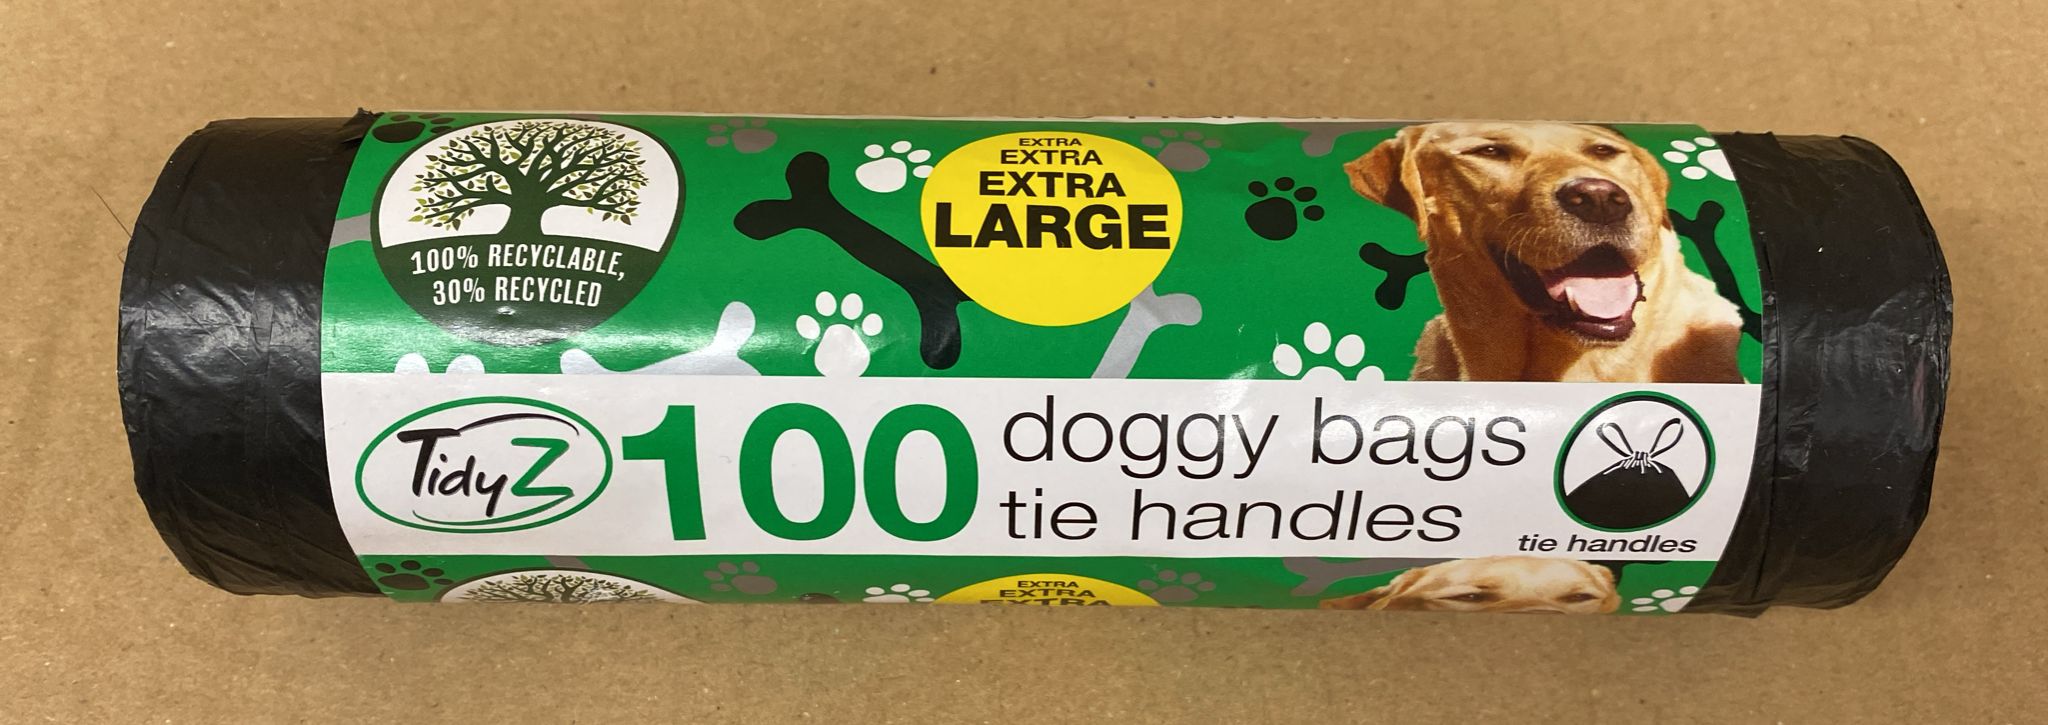 TidyZ Extra Large Tie Handle Doggy Bags 100 Pack-4735